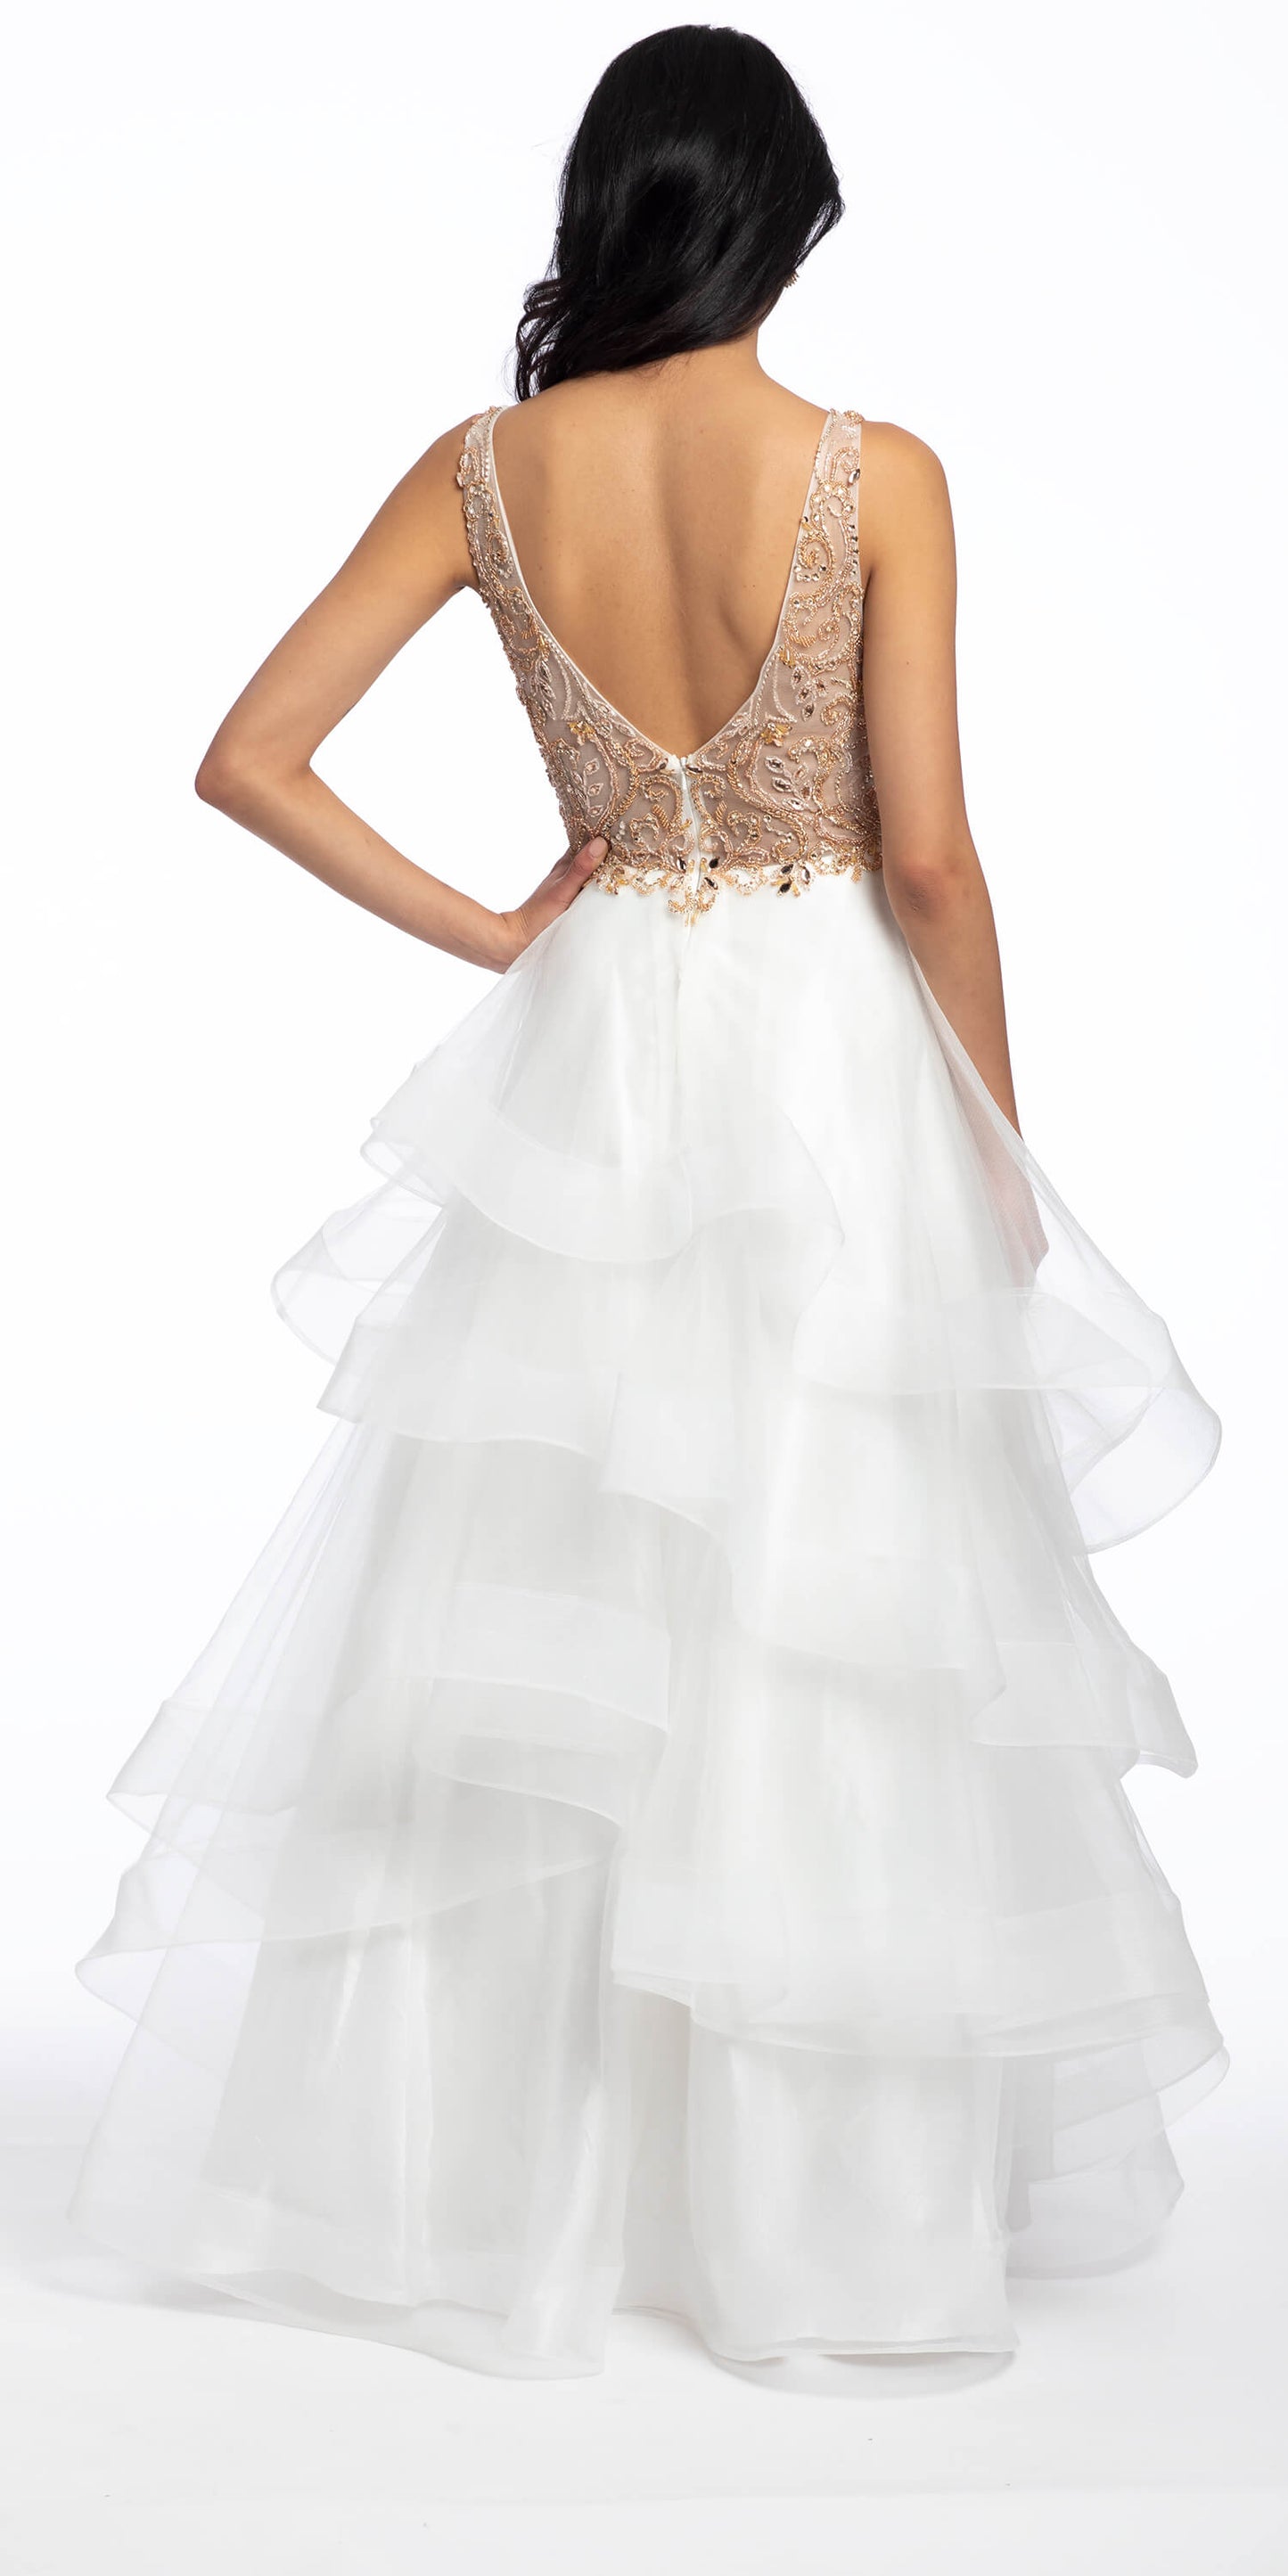 Camille La Vie Mesh Beaded Plunging Tiered Ballgown